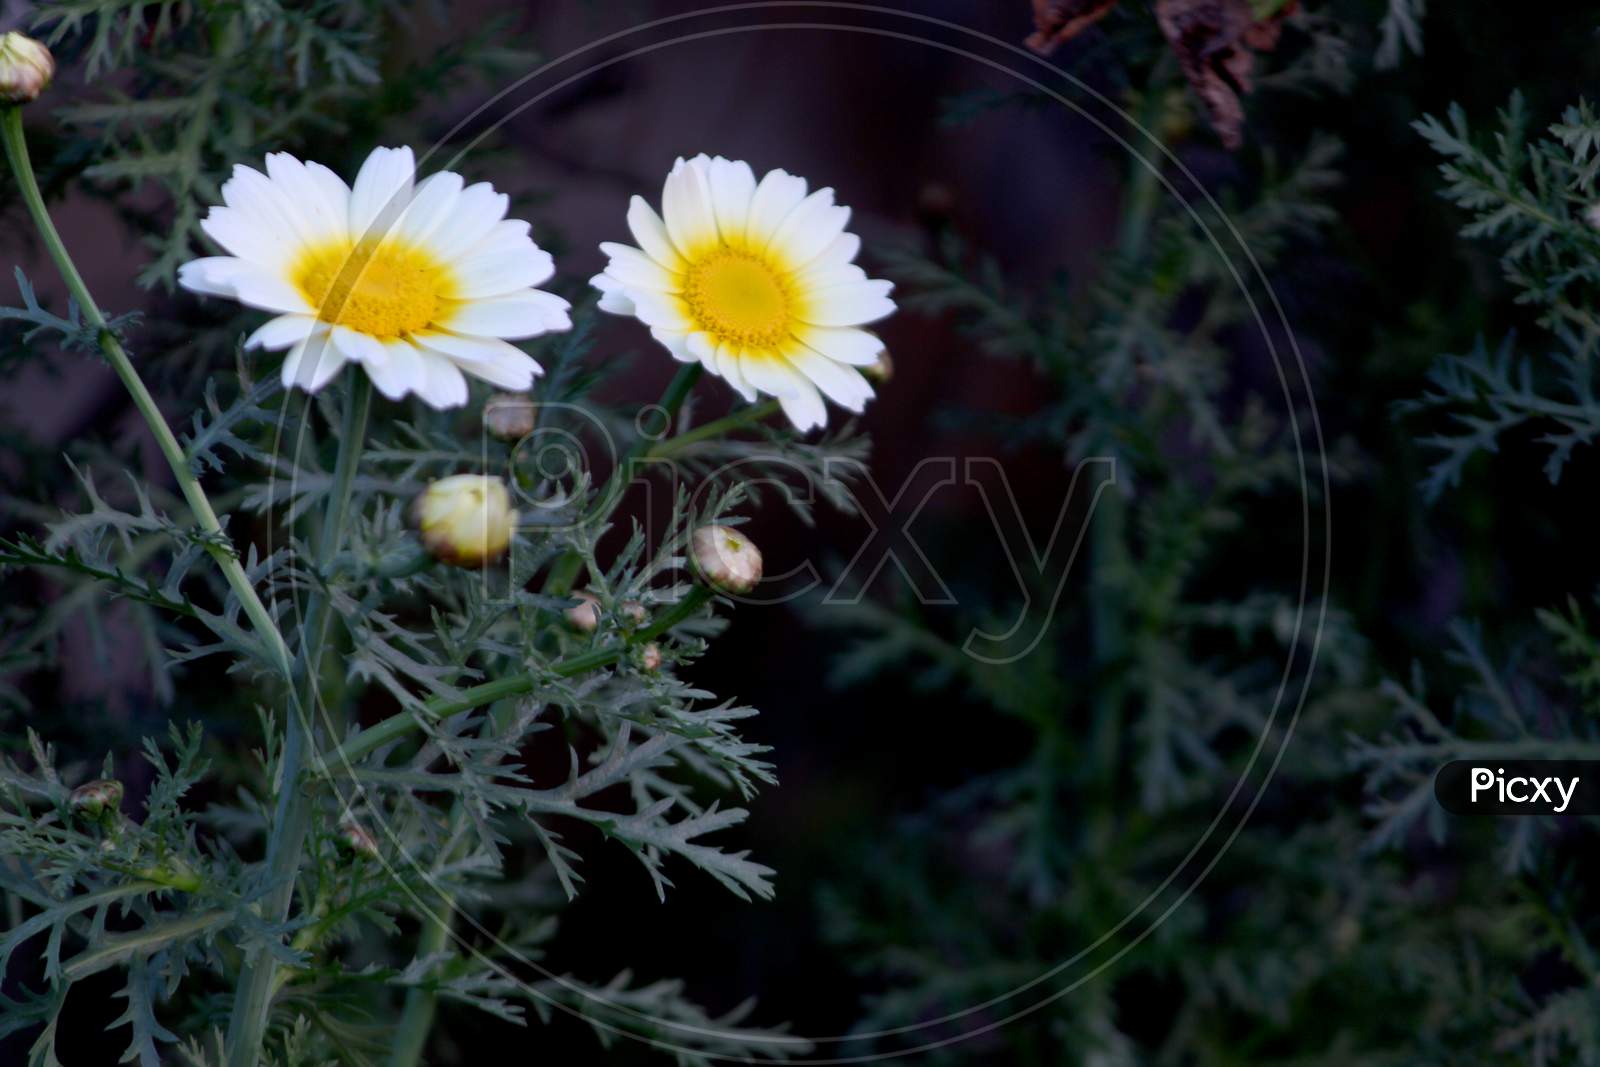 White Daisy Flowers Blooming on Plants